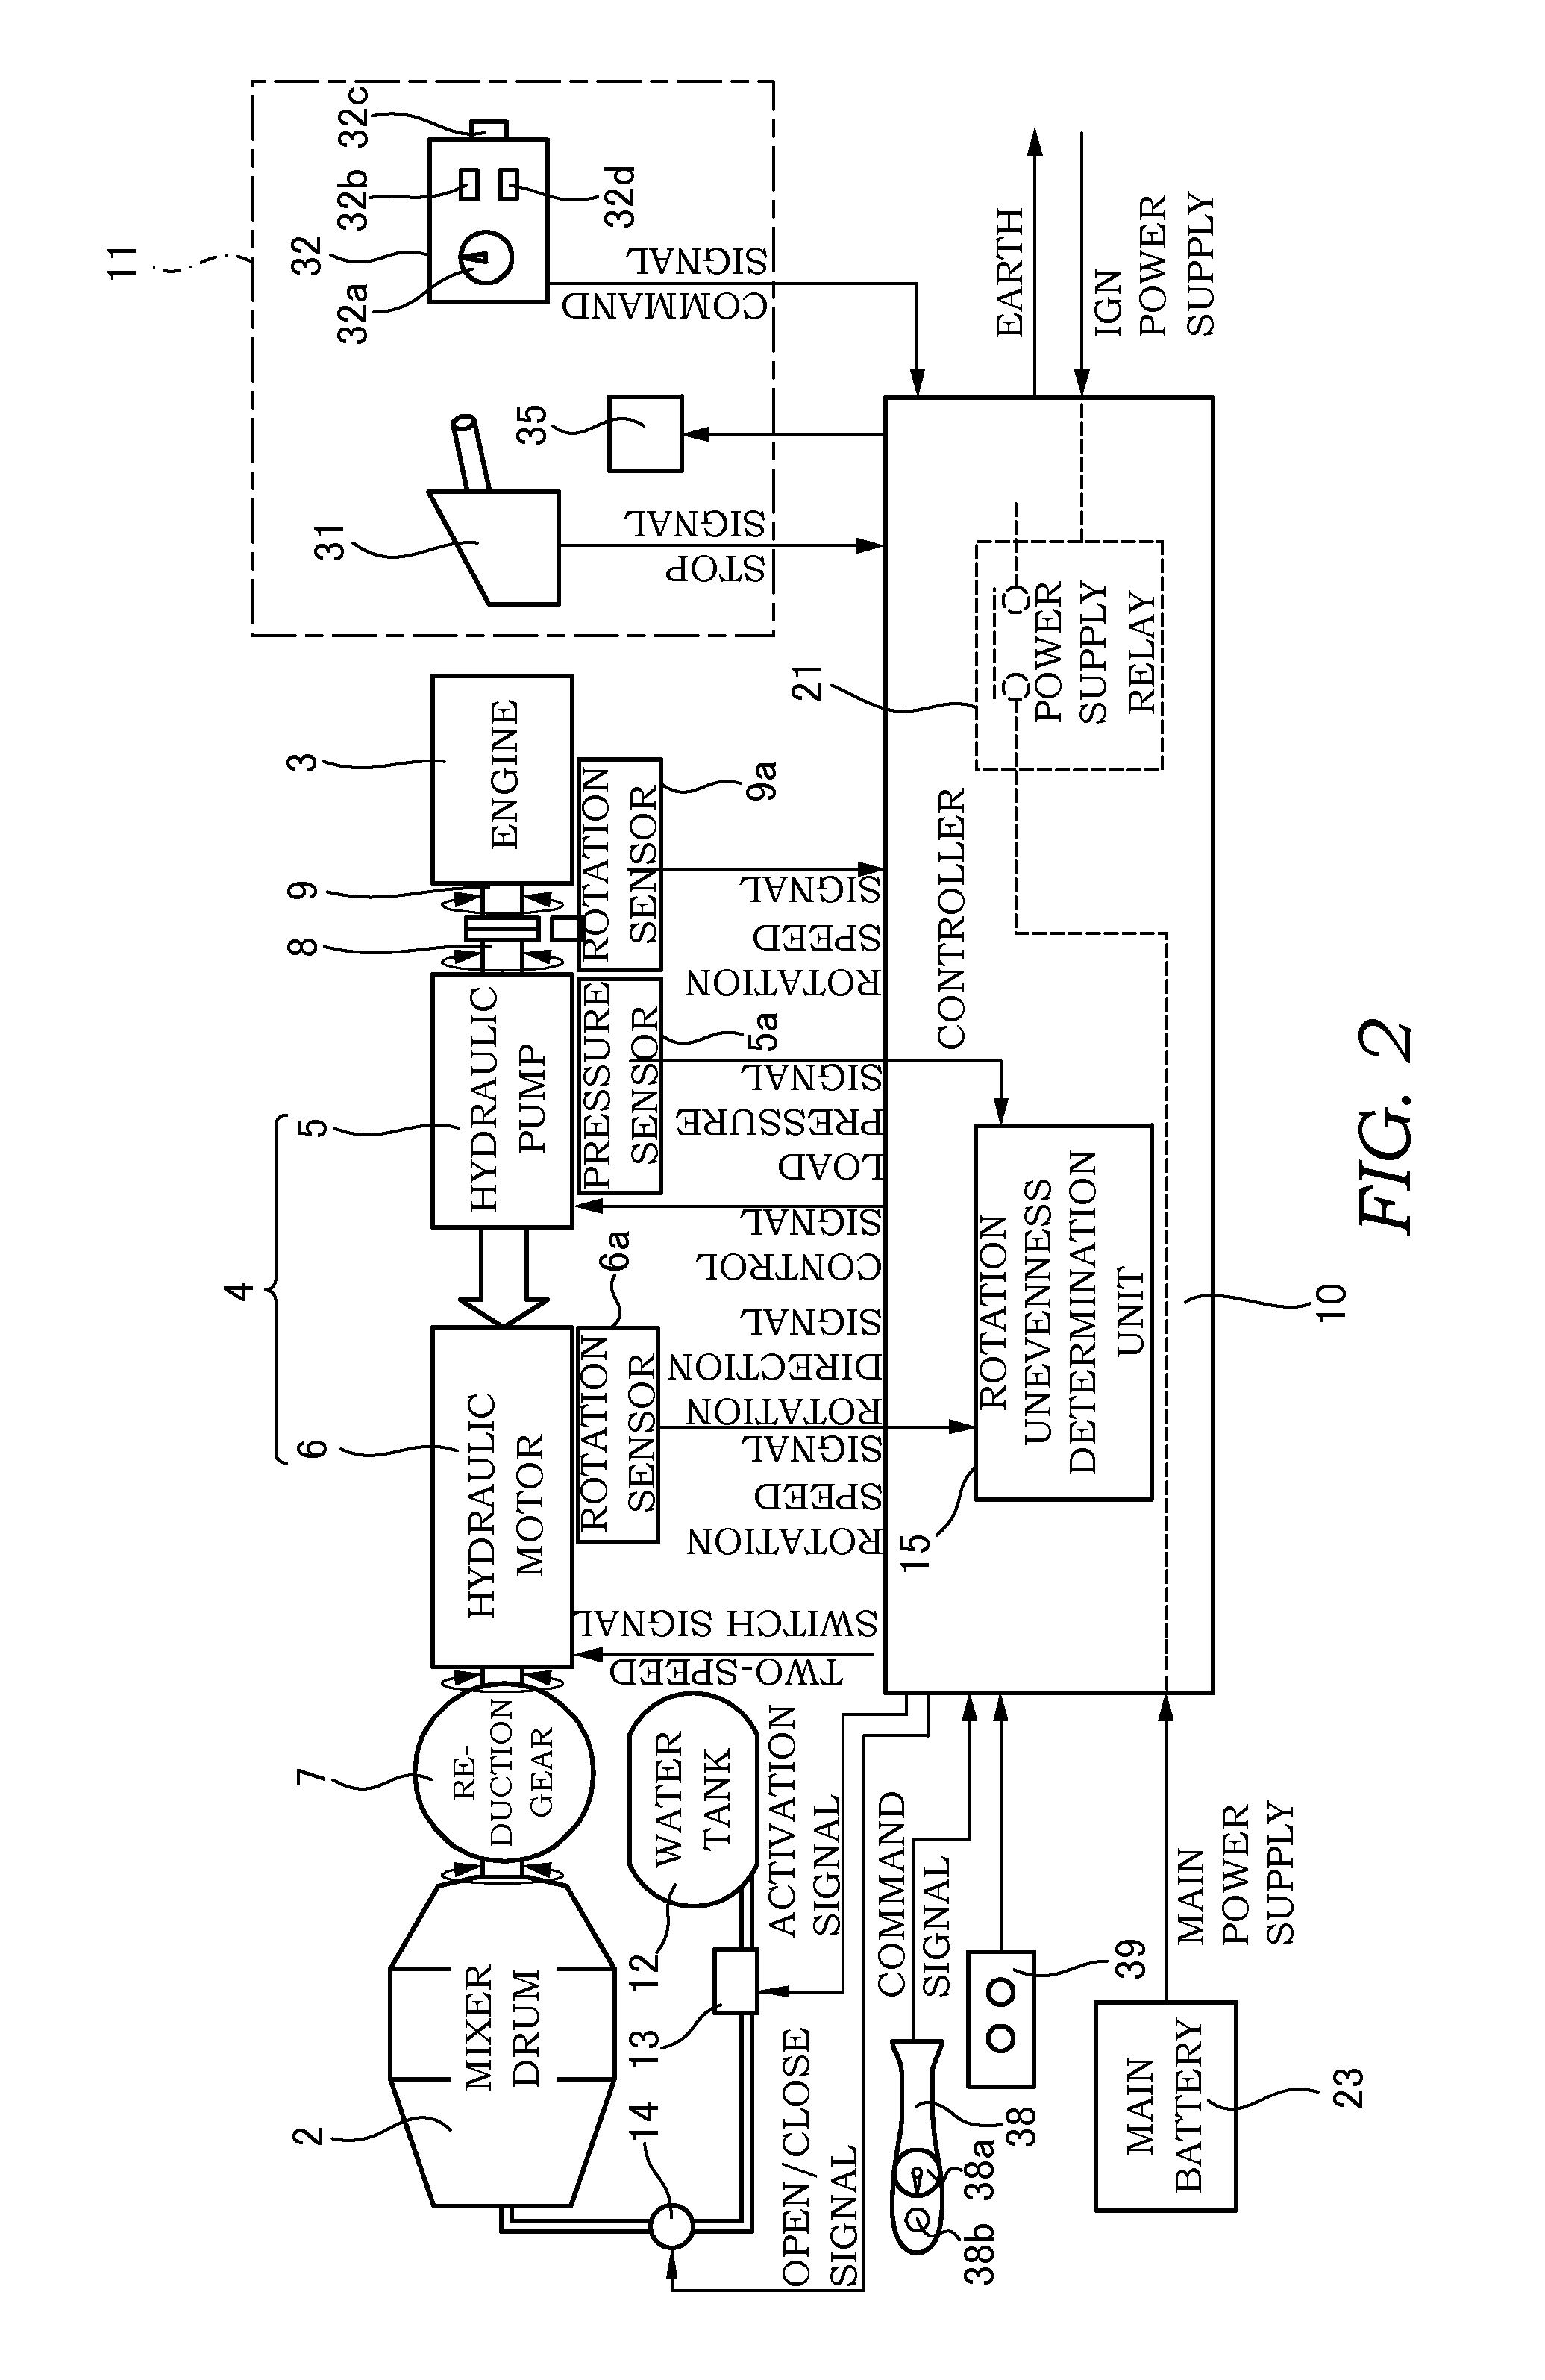 Mixer truck with drum rotation unevenness determination